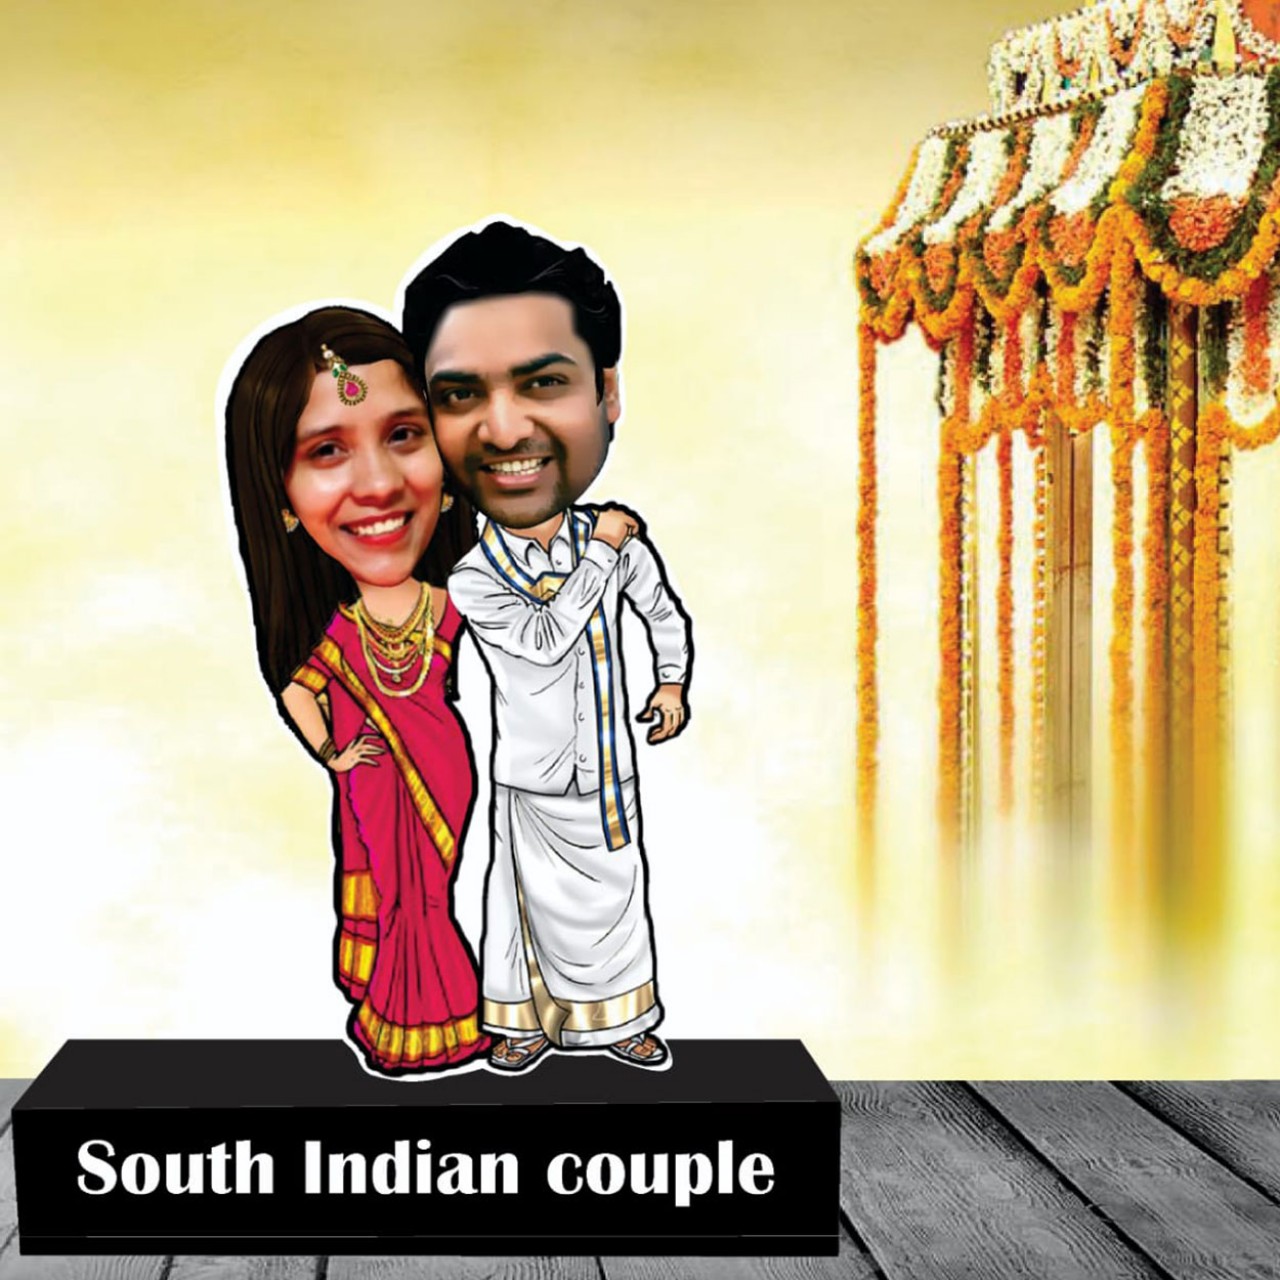 Personalized South Indian Couple Caricature